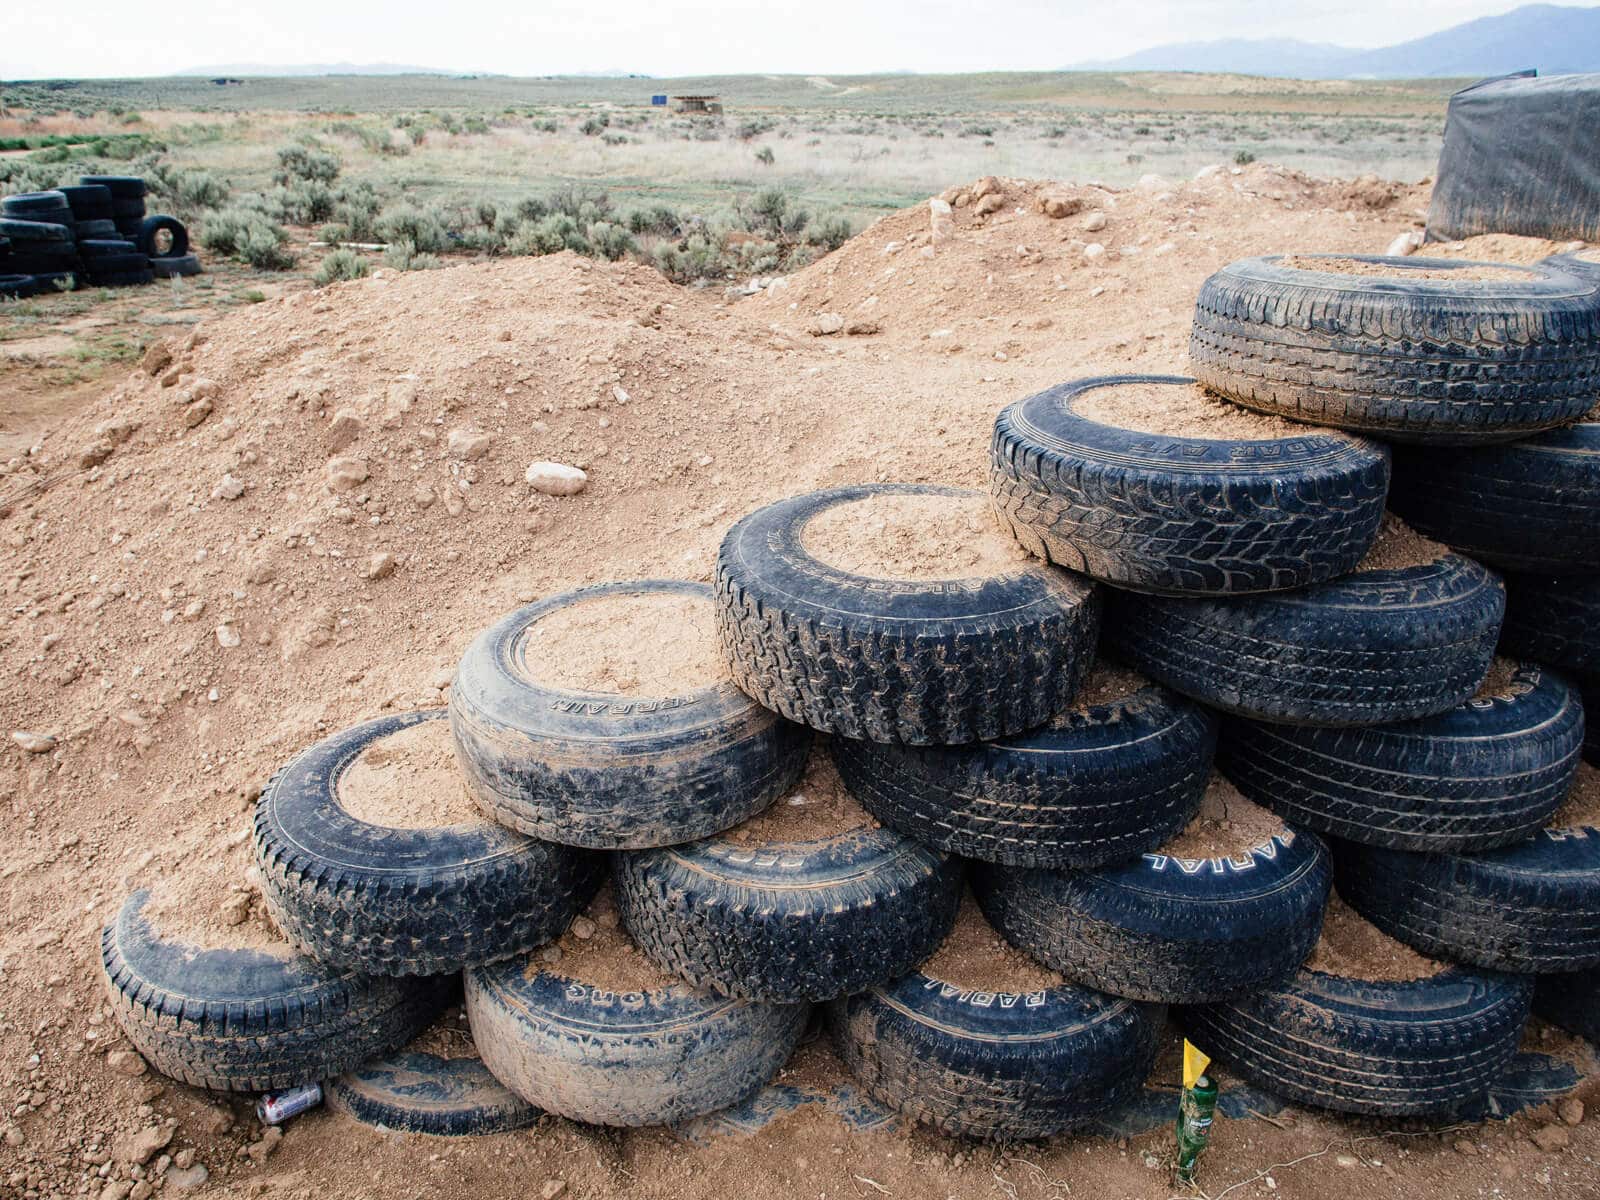 Thousands of pounds of dirt pounded into used tires to create walls